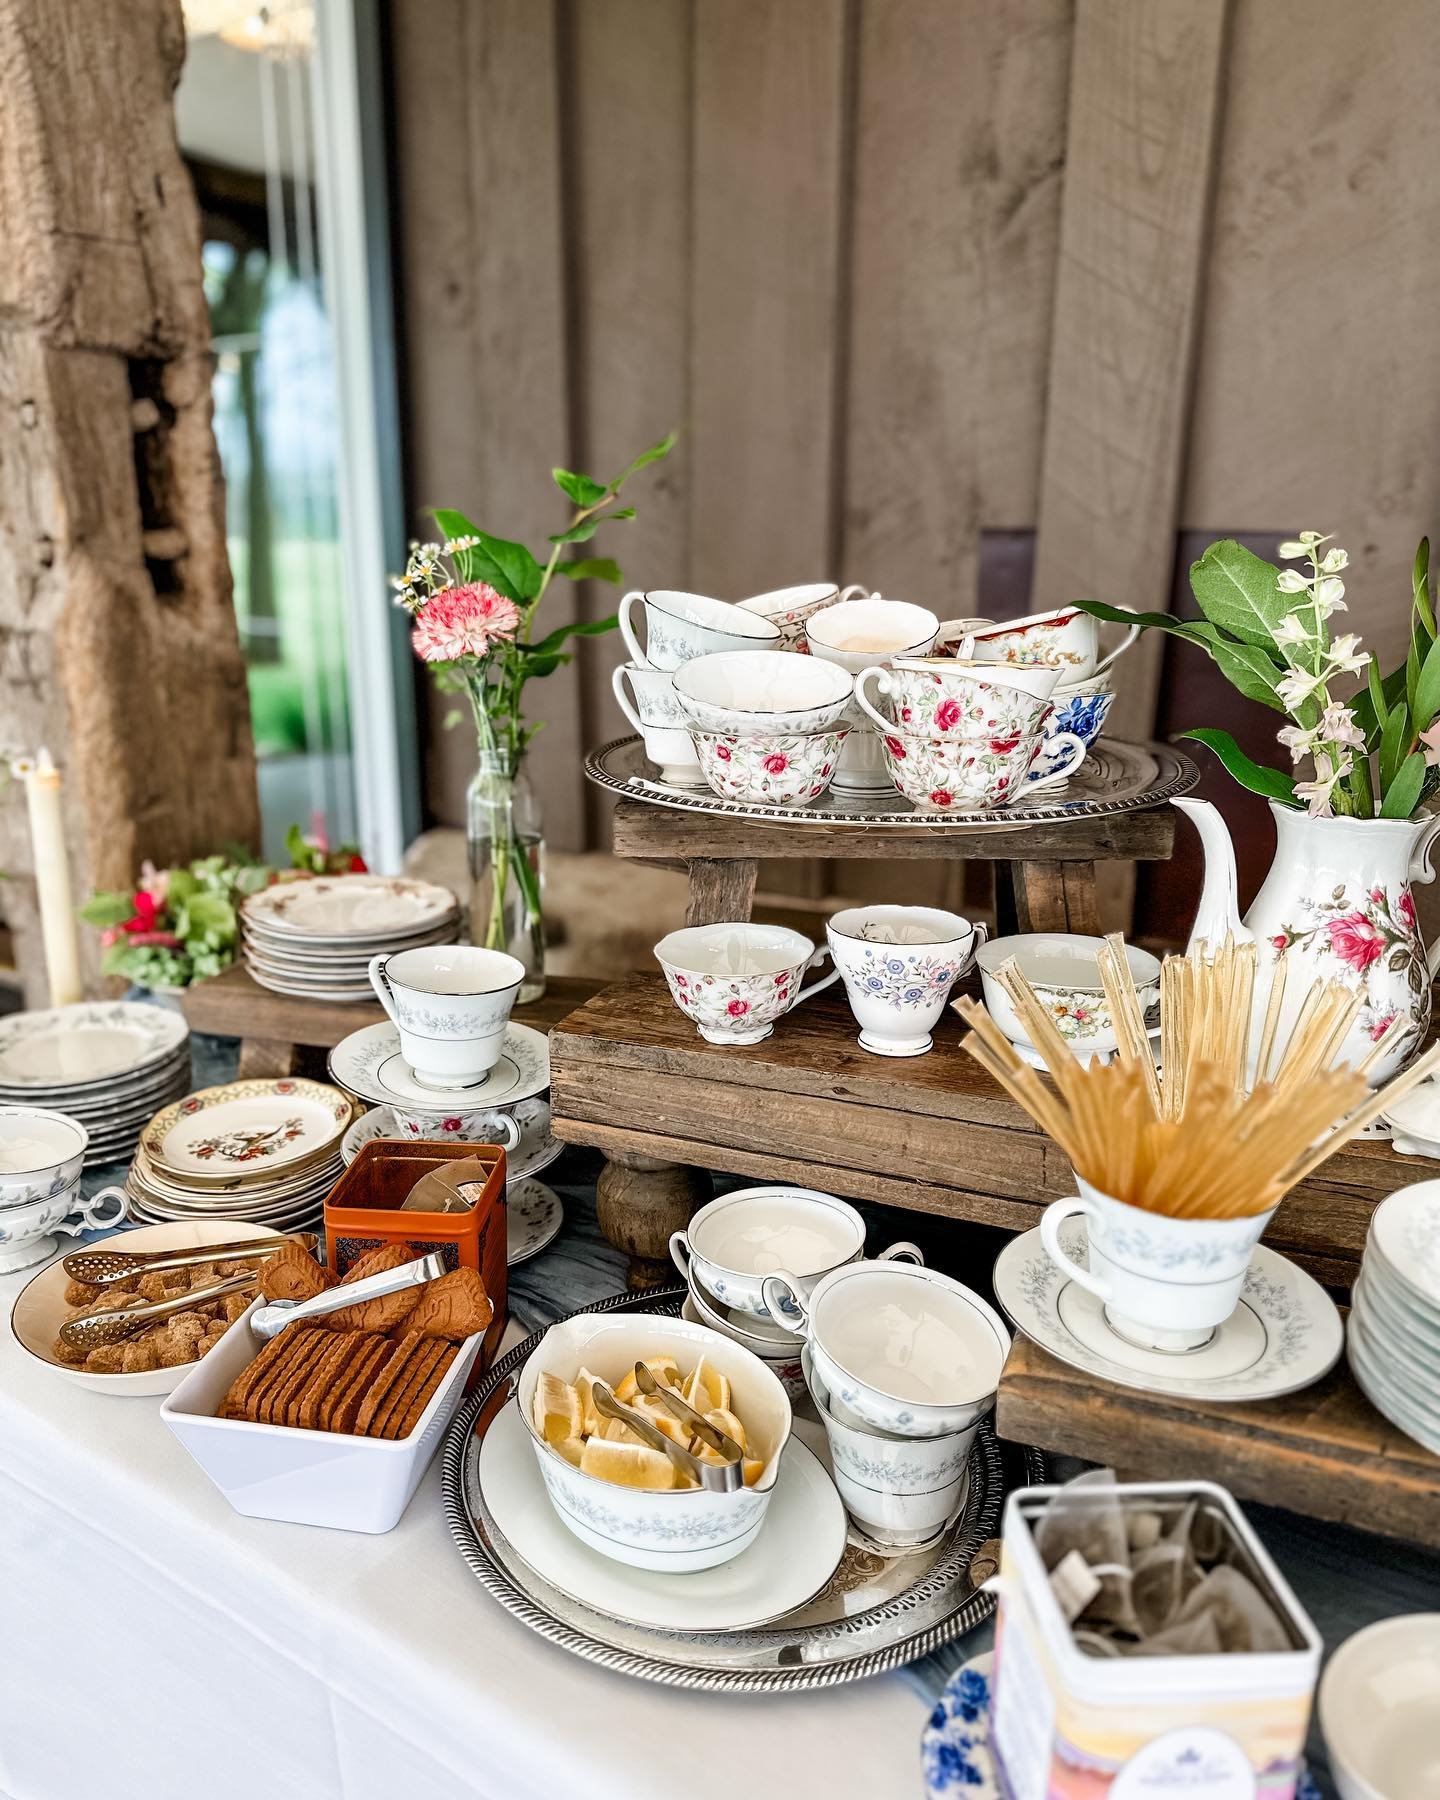 The Tea Party will go down as one of our favorite events! Thank you to everyone who purchased a ticket, we loved hosting you 🫶🏻

This event was done ENTIRELY by The Mill District, complete with vintage china and chiavari chairs&mdash; both availabl